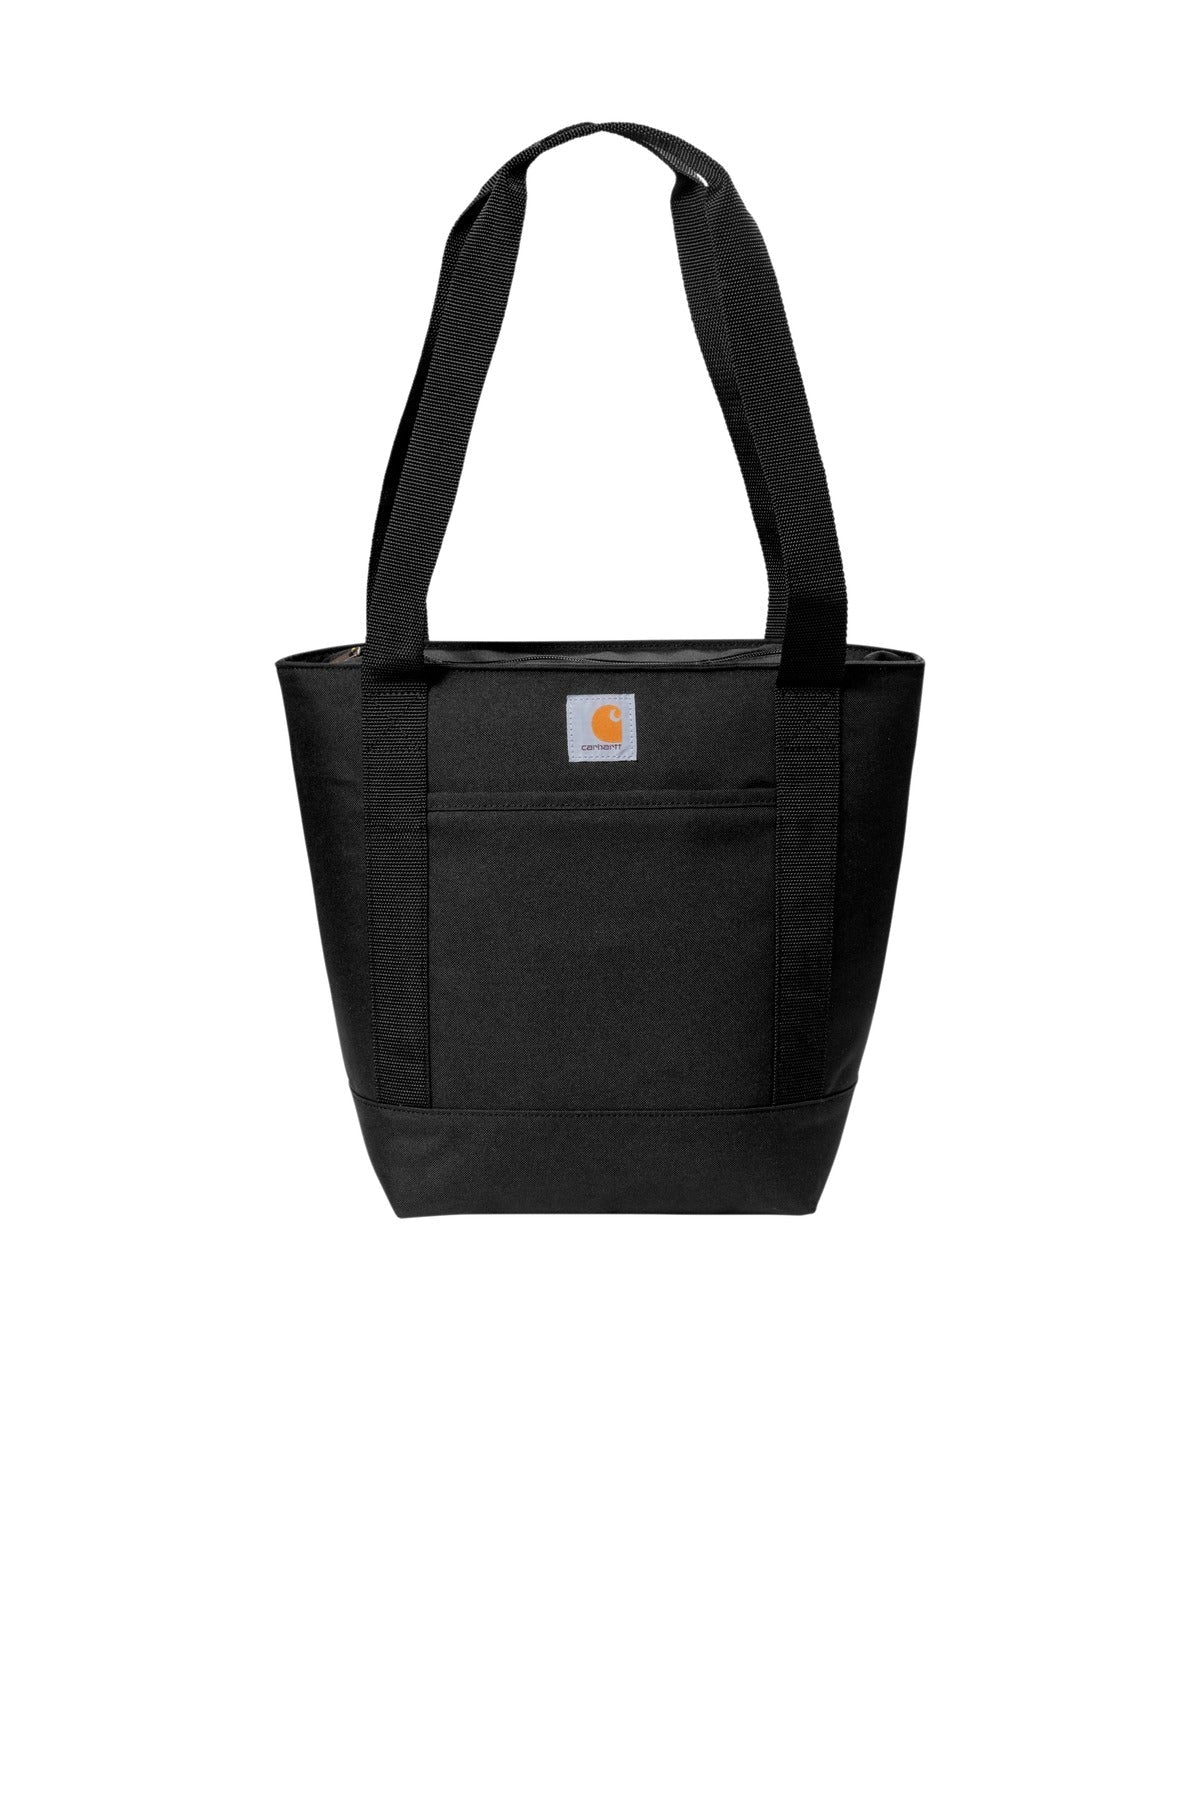 Carhartt® Tote 18-Can Cooler. CT89101701 - DFW Impression